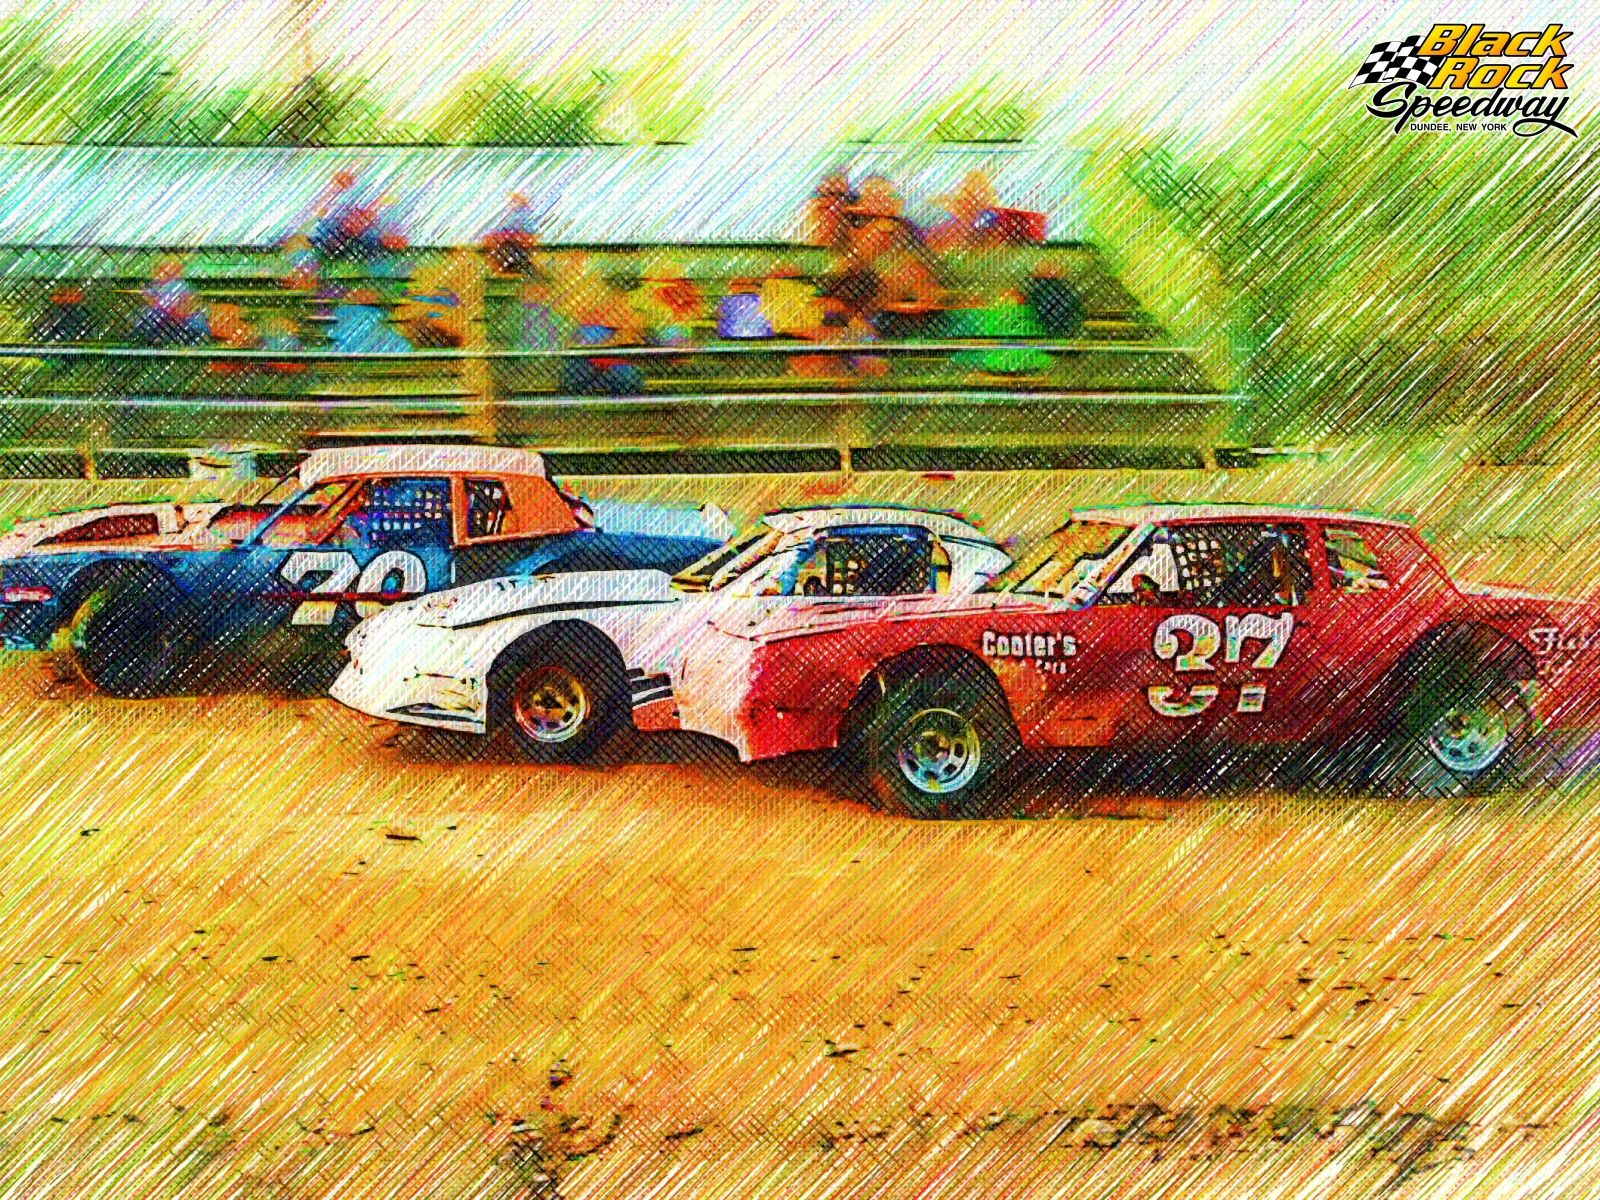 Black Rock Speedway, NY: The home of dirt track stock car racing excitement!